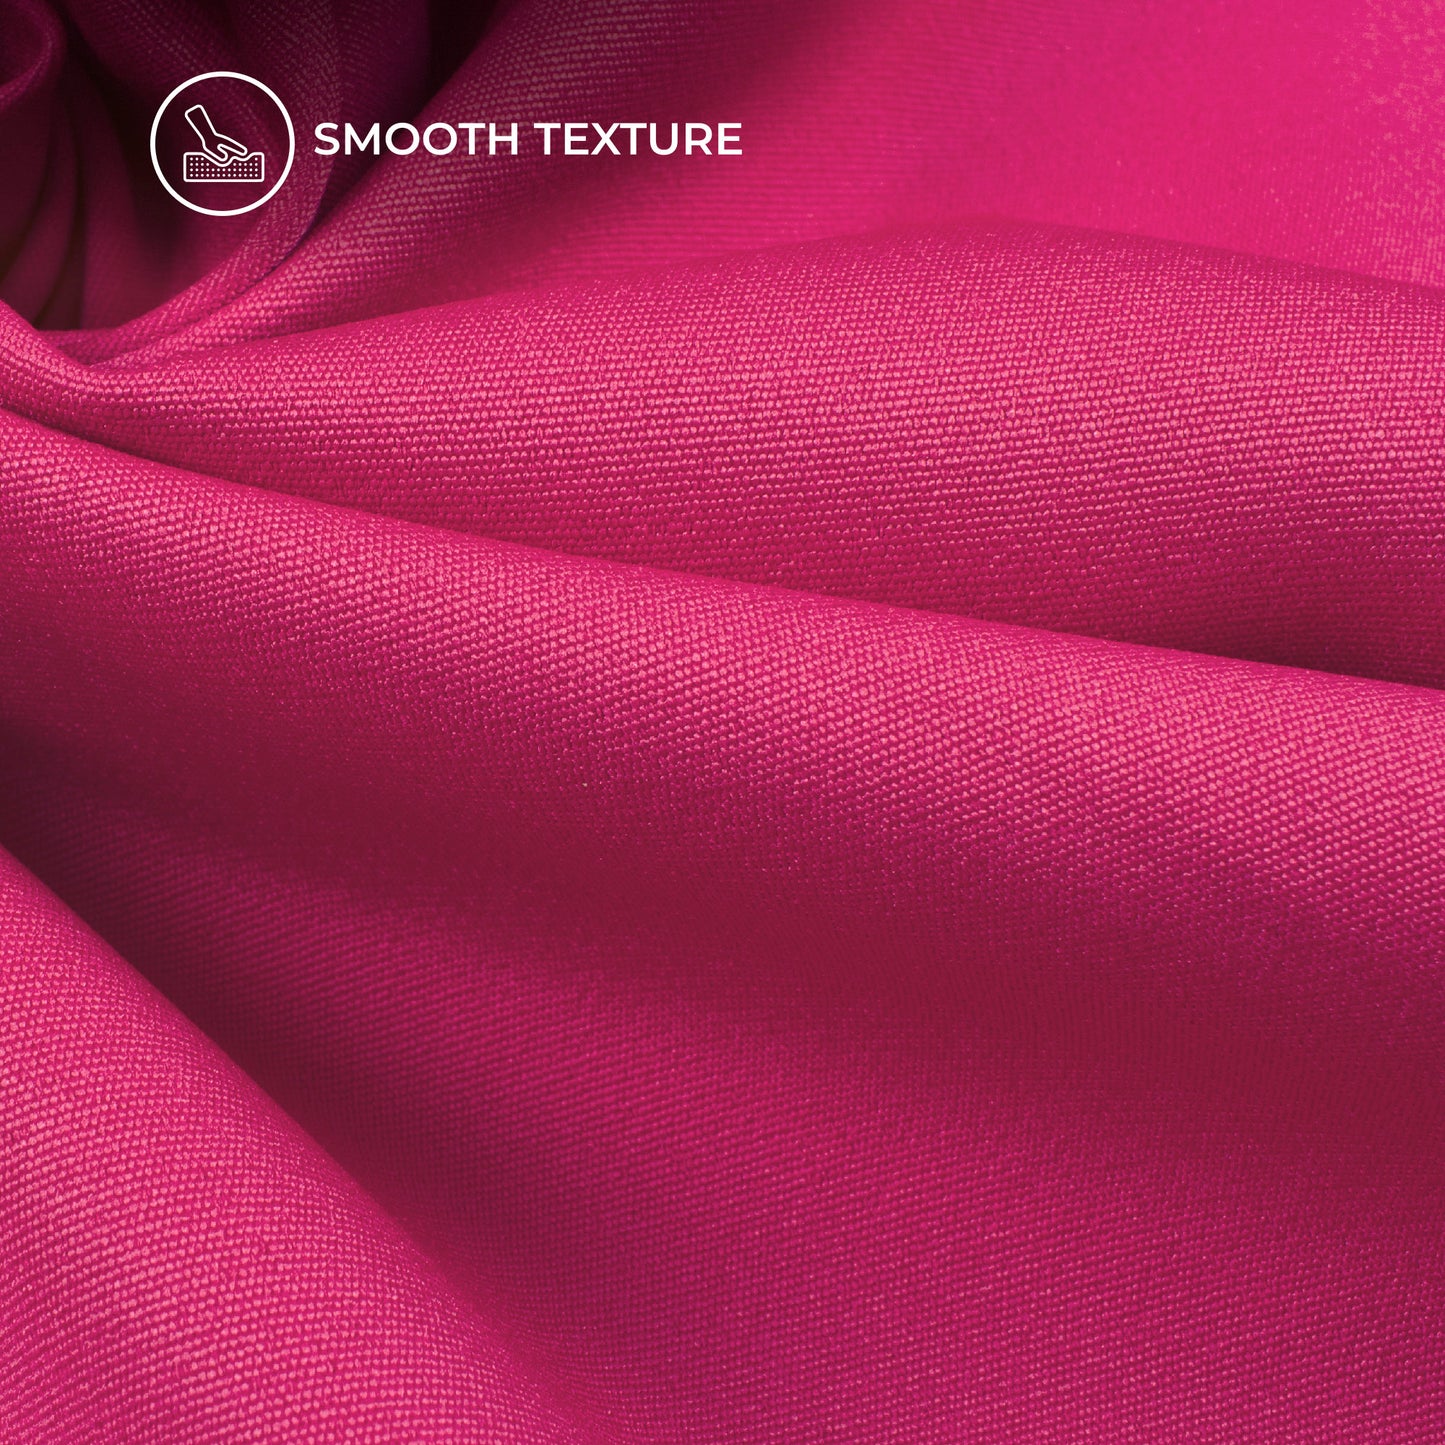 Bright Pink Plain Banana Crepe Fabric (Width 58 Inches)